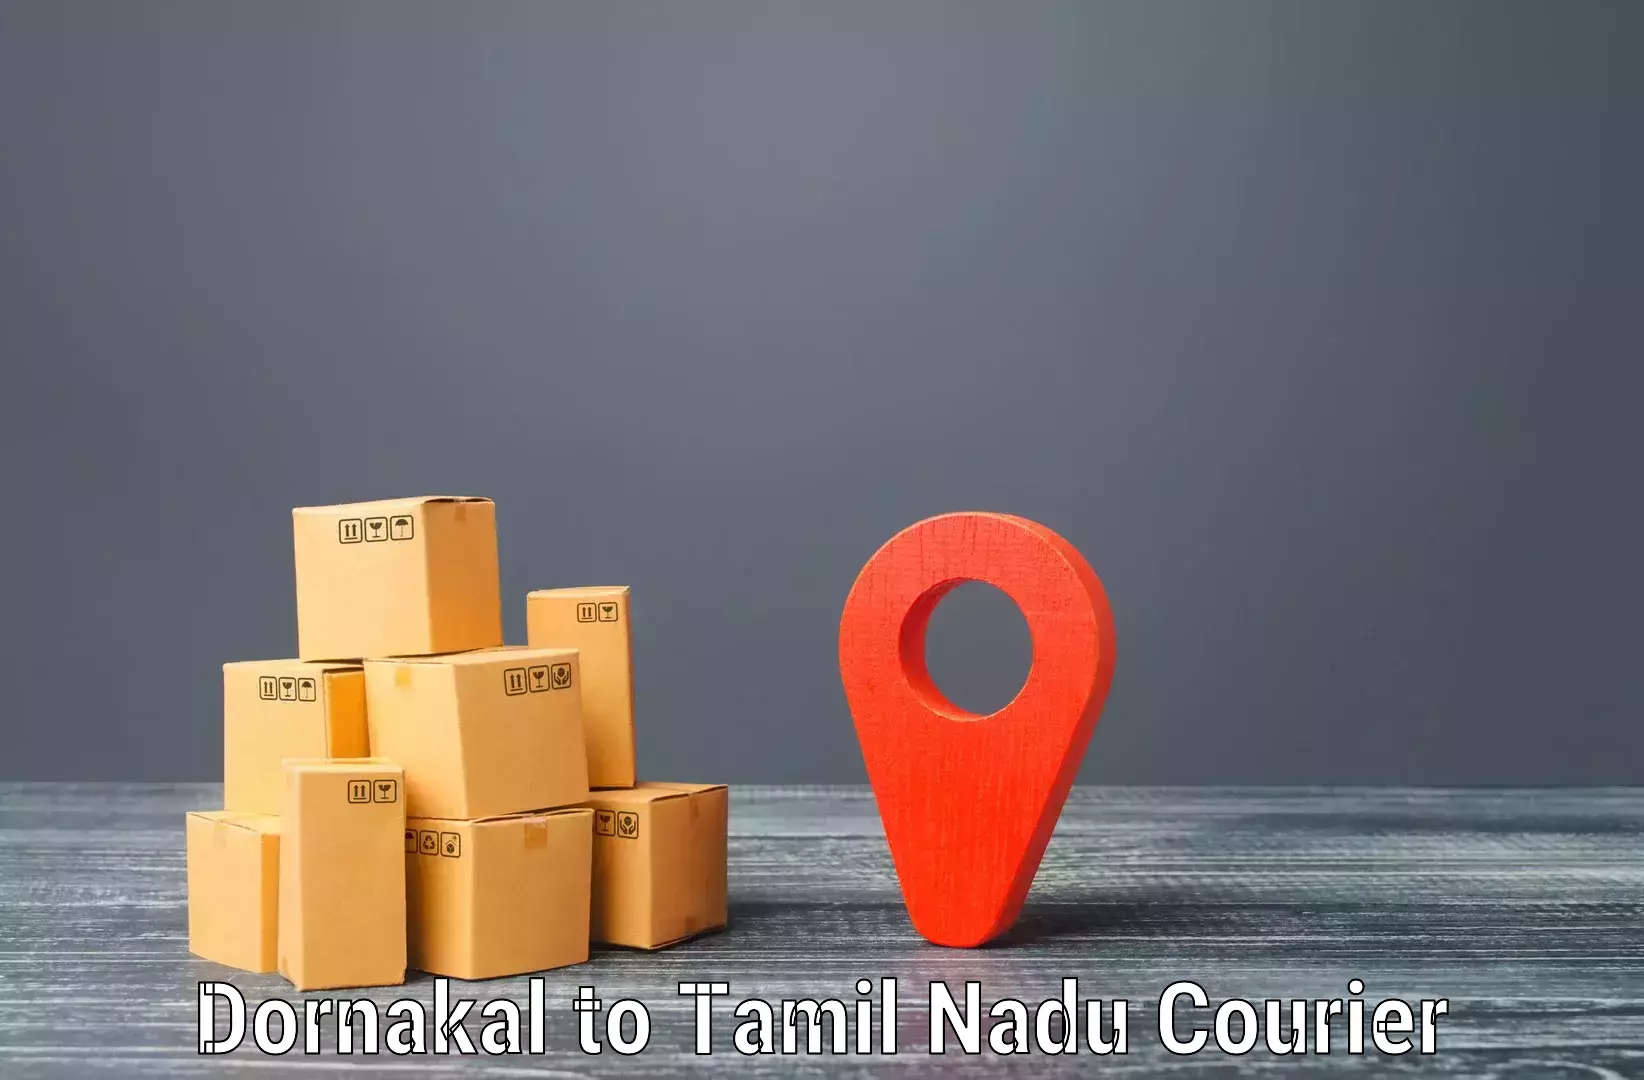 Advanced freight services Dornakal to Hosur